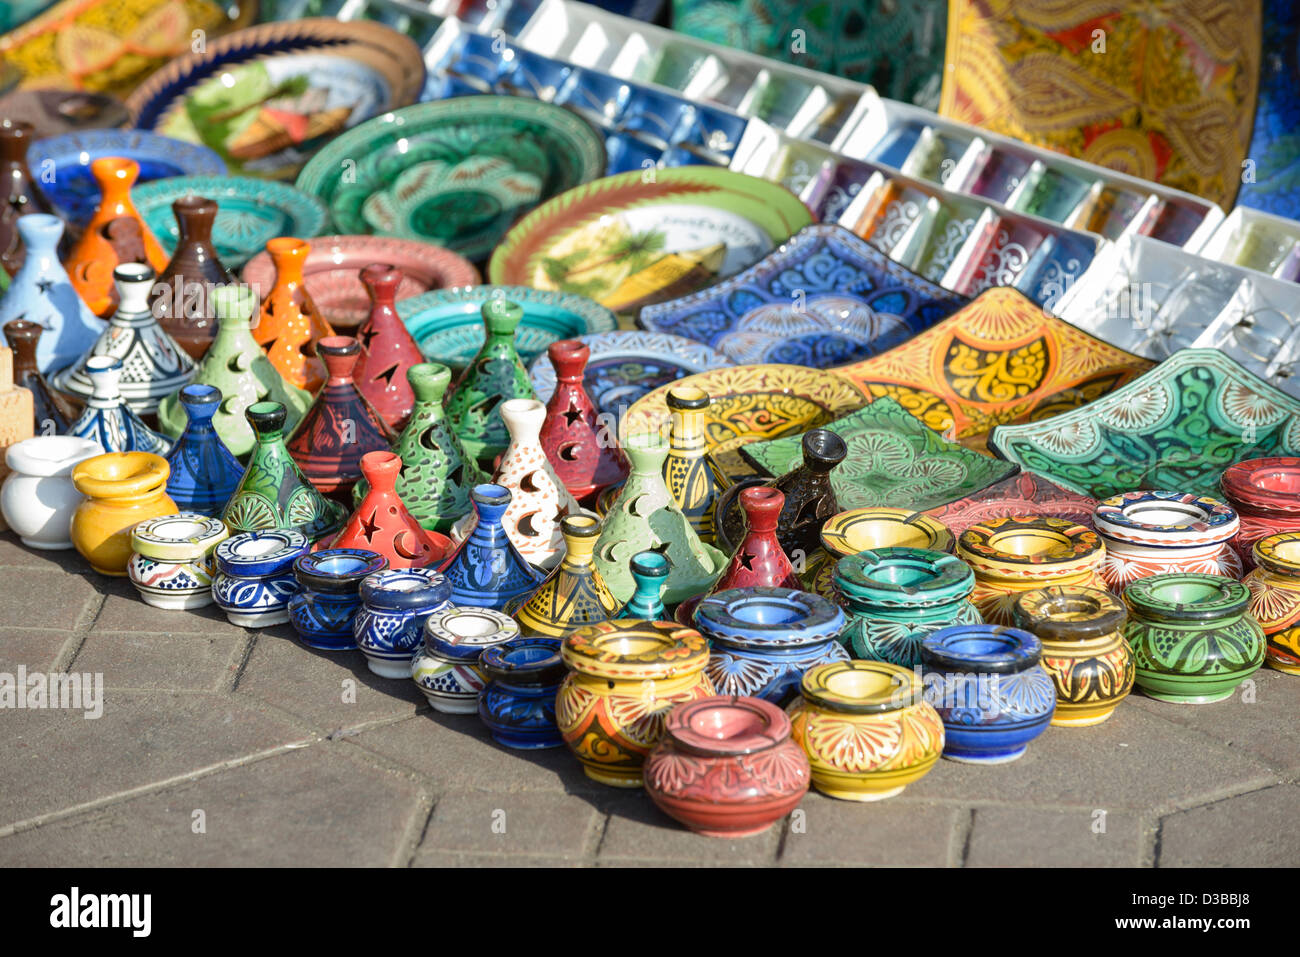 Tagines , ashtrays, plates and other Moroccan souvenirs on display in the souk, Marrakech, Morocco. Stock Photo